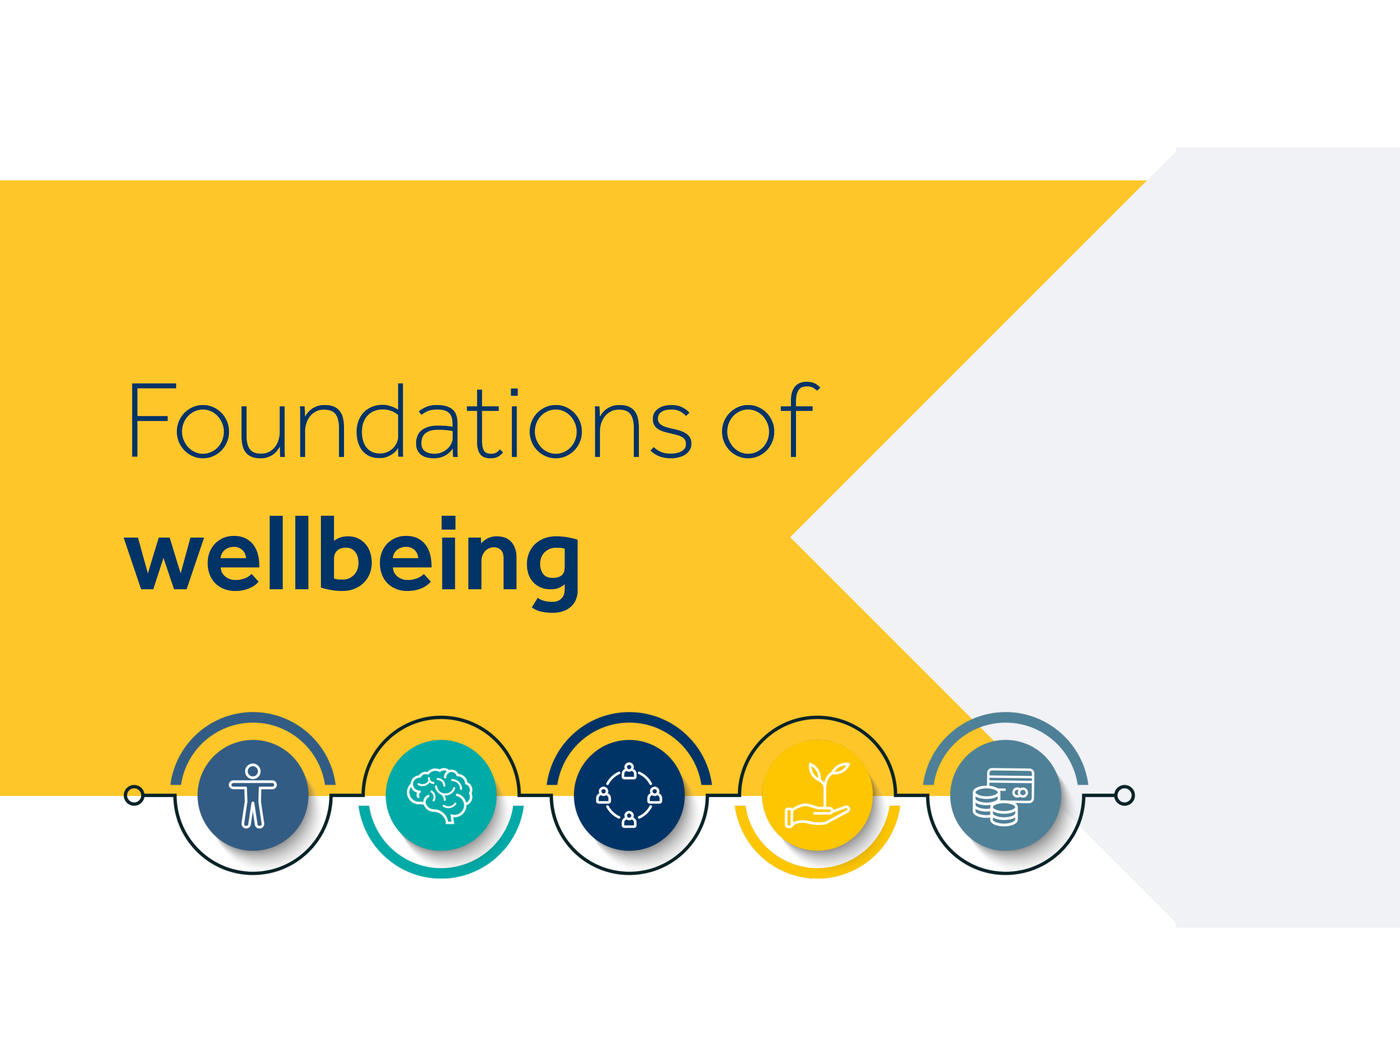 Keller's foundations of wellbeing